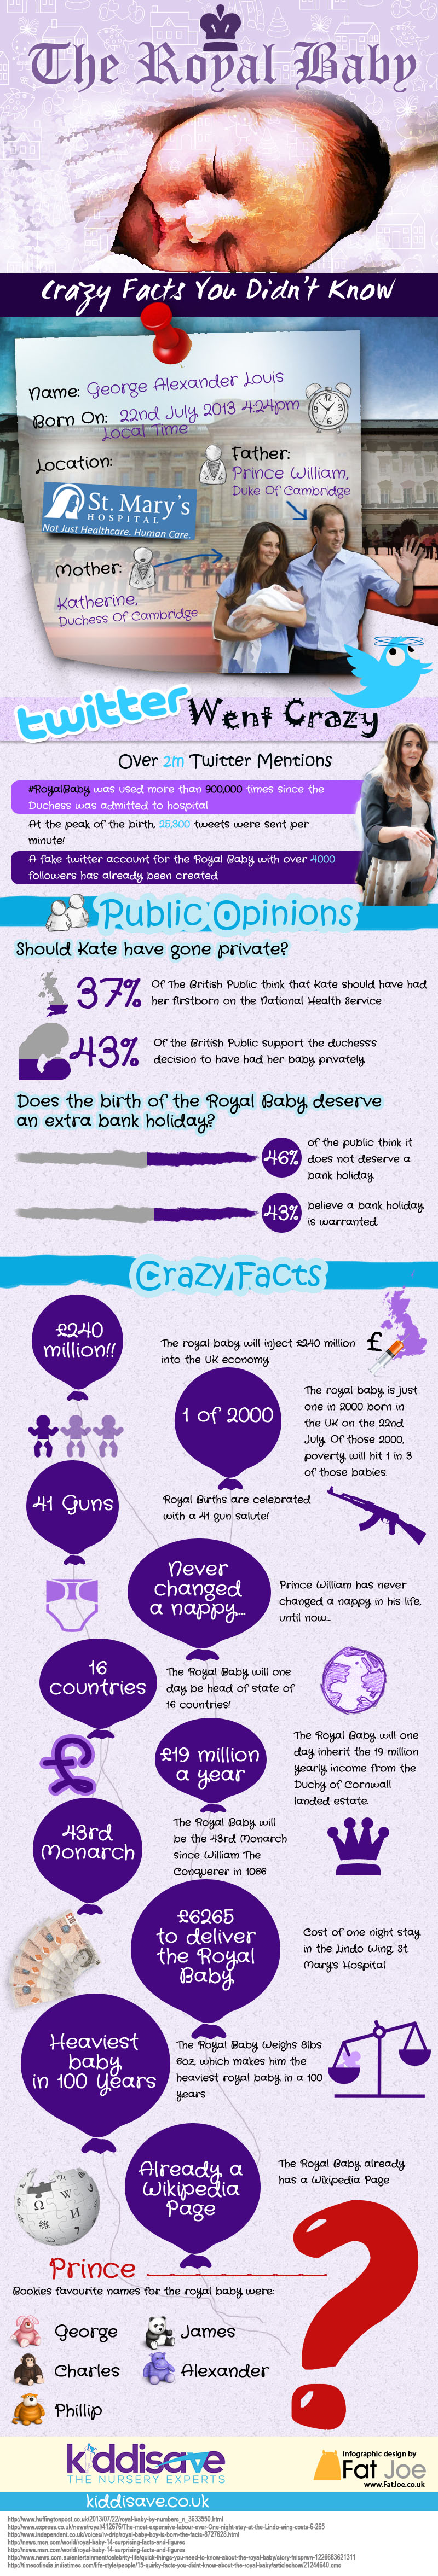 The Royal Baby: Crazy Facts You Didn't Know